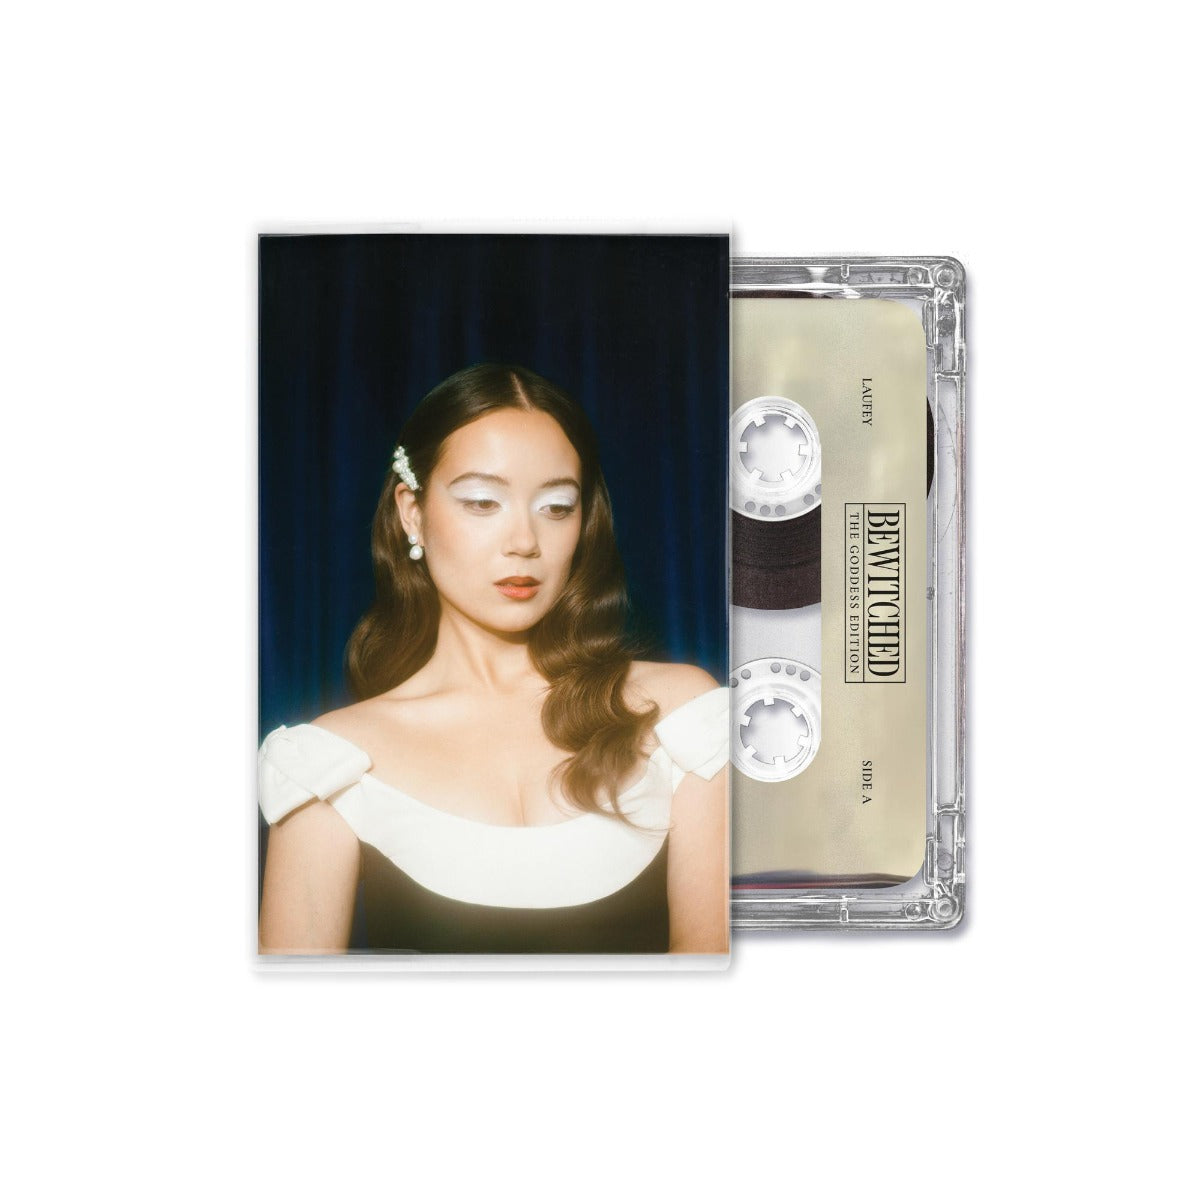 Laufey | Bewitched: The Goddess Edition (Cassette) | Cassette